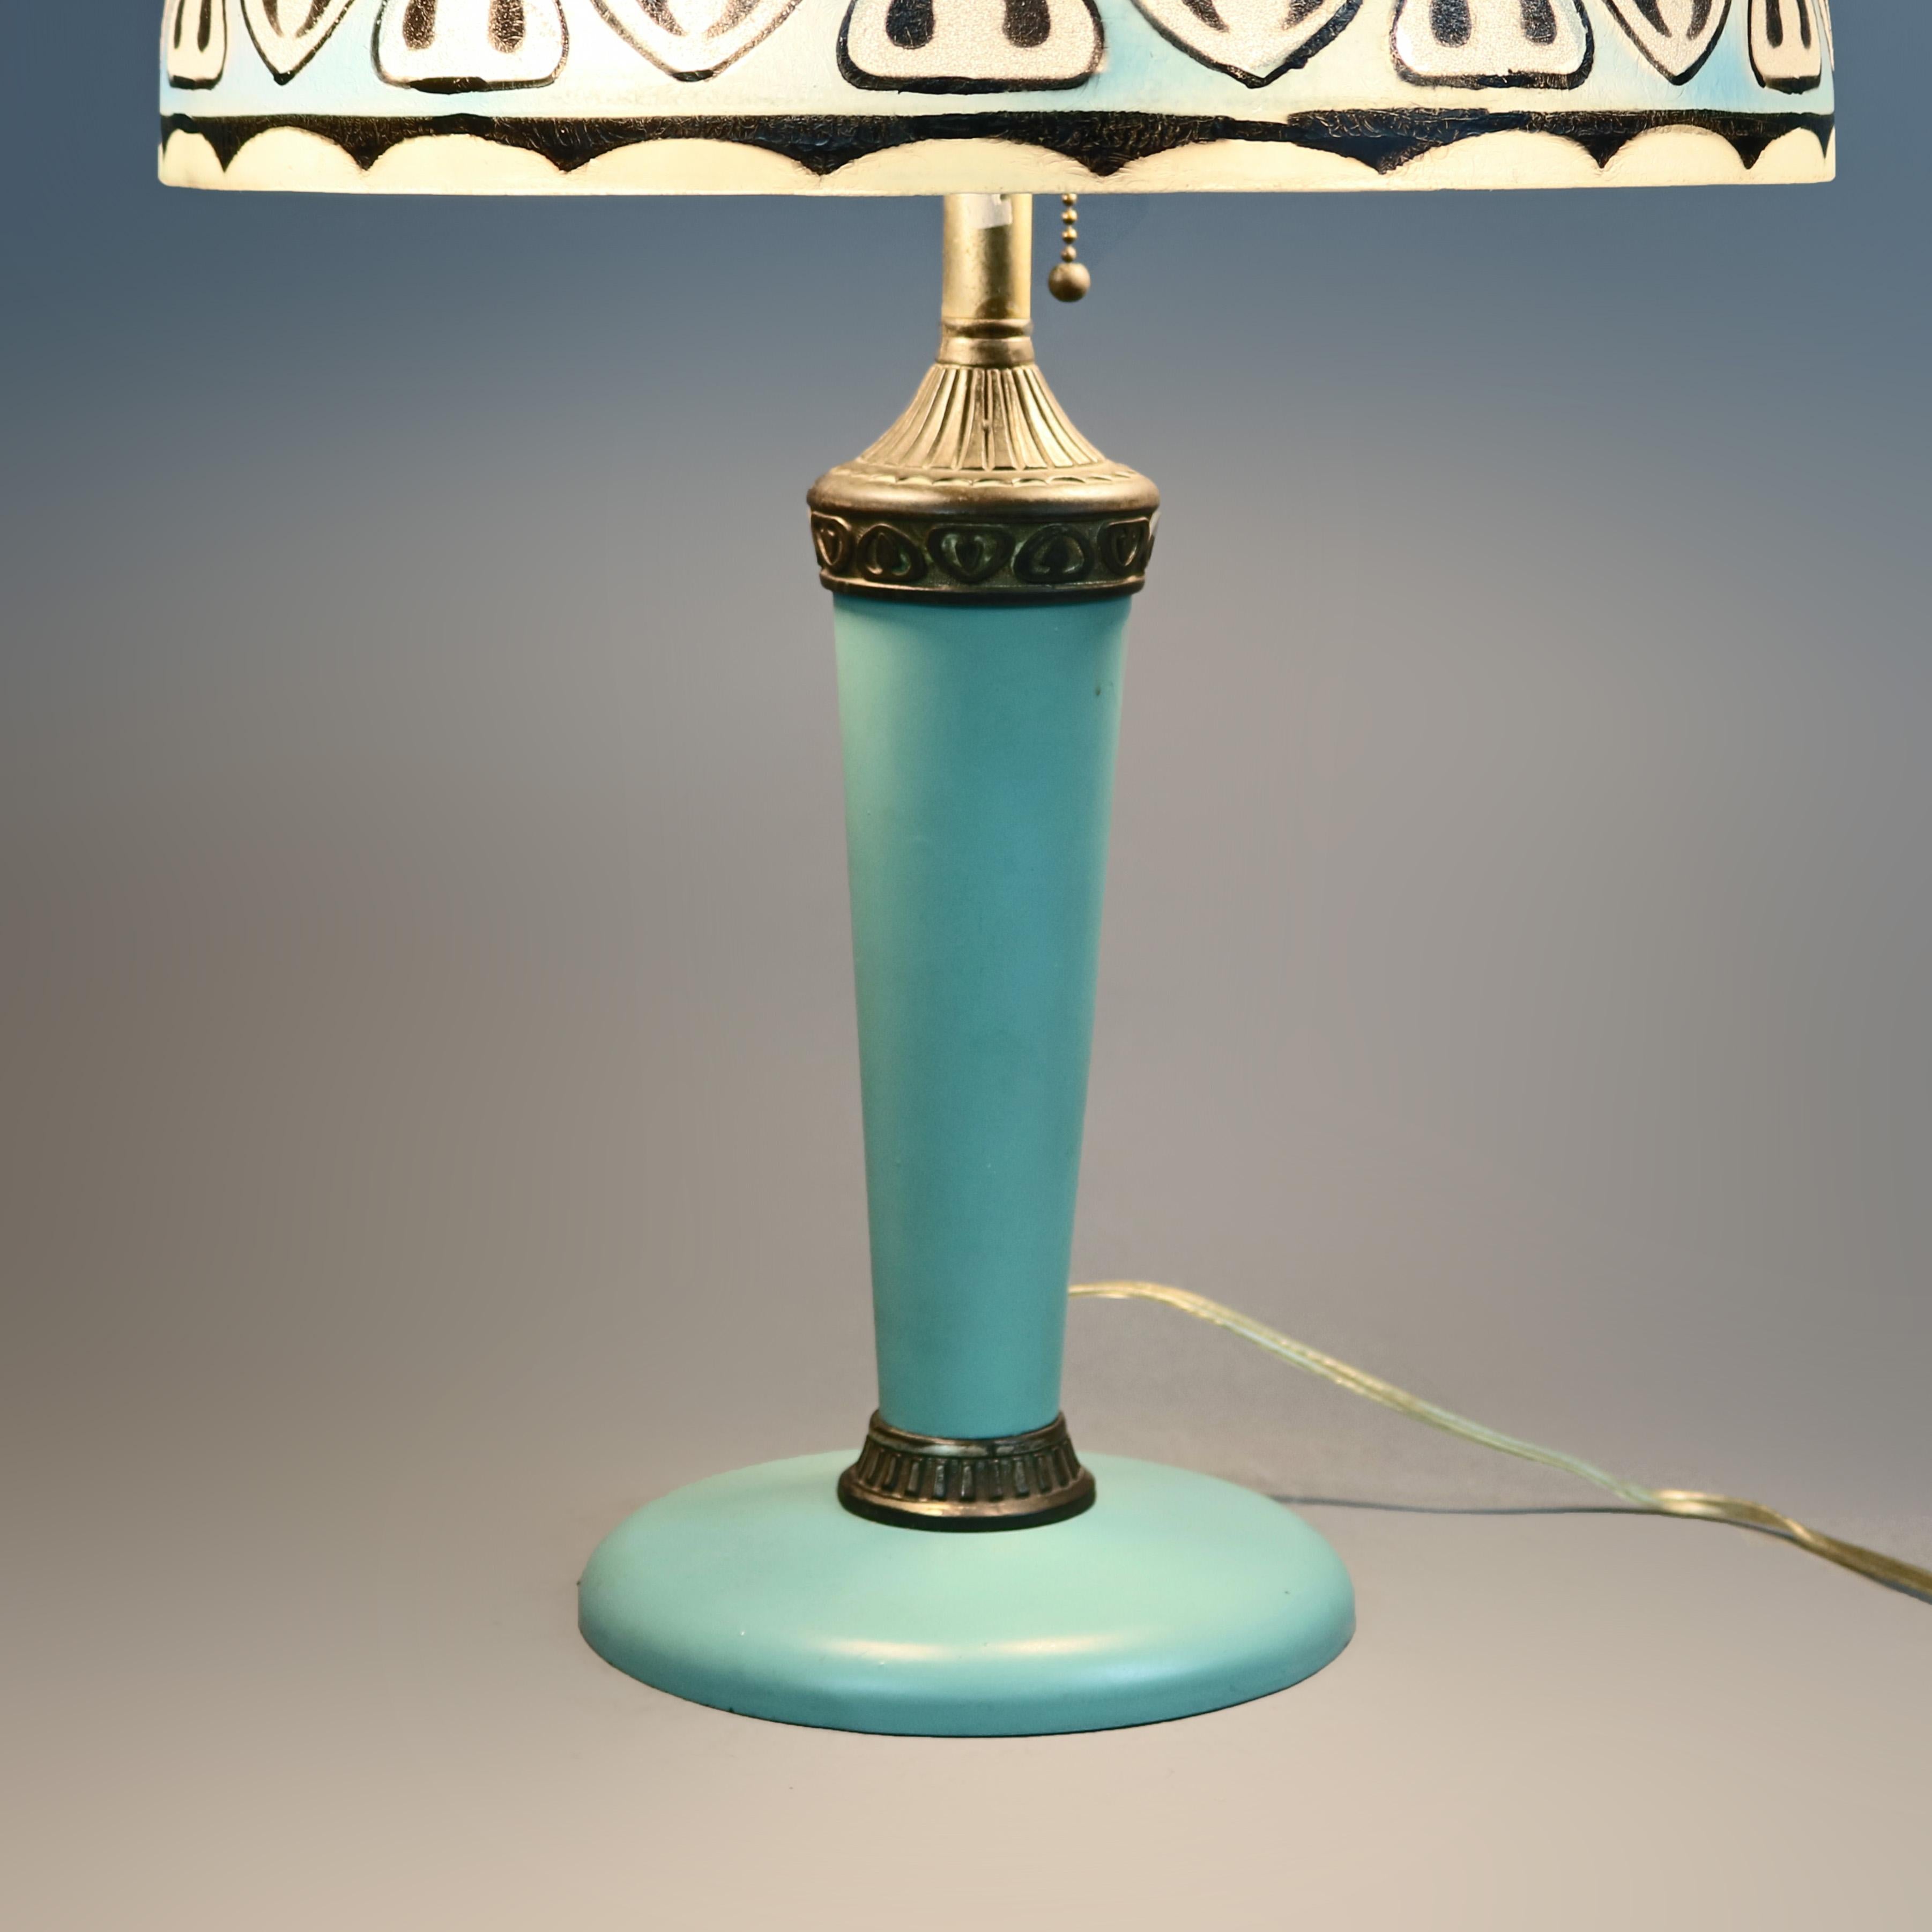 20th Century Antique Arts & Crafts Pittsburgh Reverse Painted Lamp, circa 1920